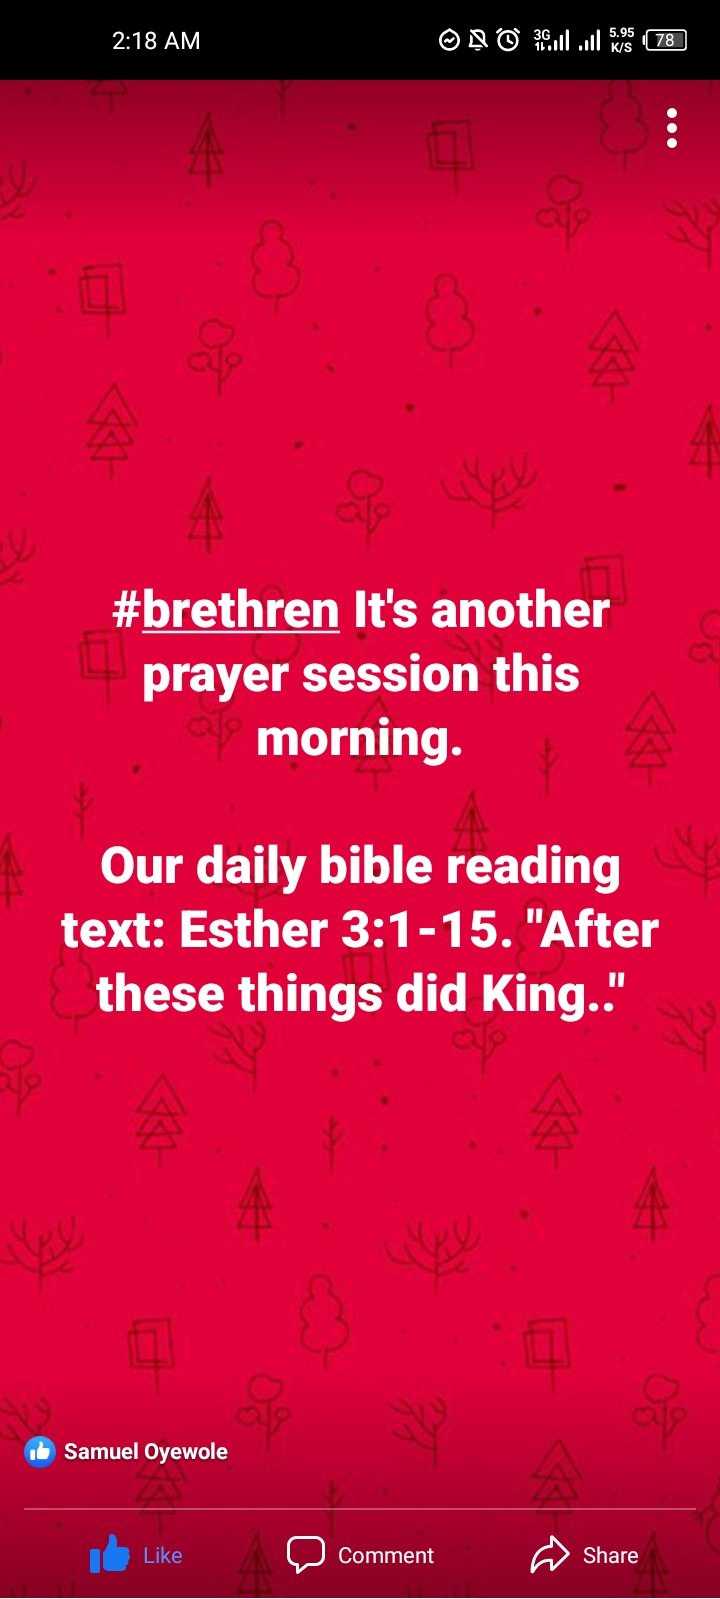 218 AM o40 Gll.Eo #brethren It's another prayer session this morning: Our daily bible reading text: Esther 3:1-15. "After these things did King:" Samuel Oyewrole Lke Comment Share